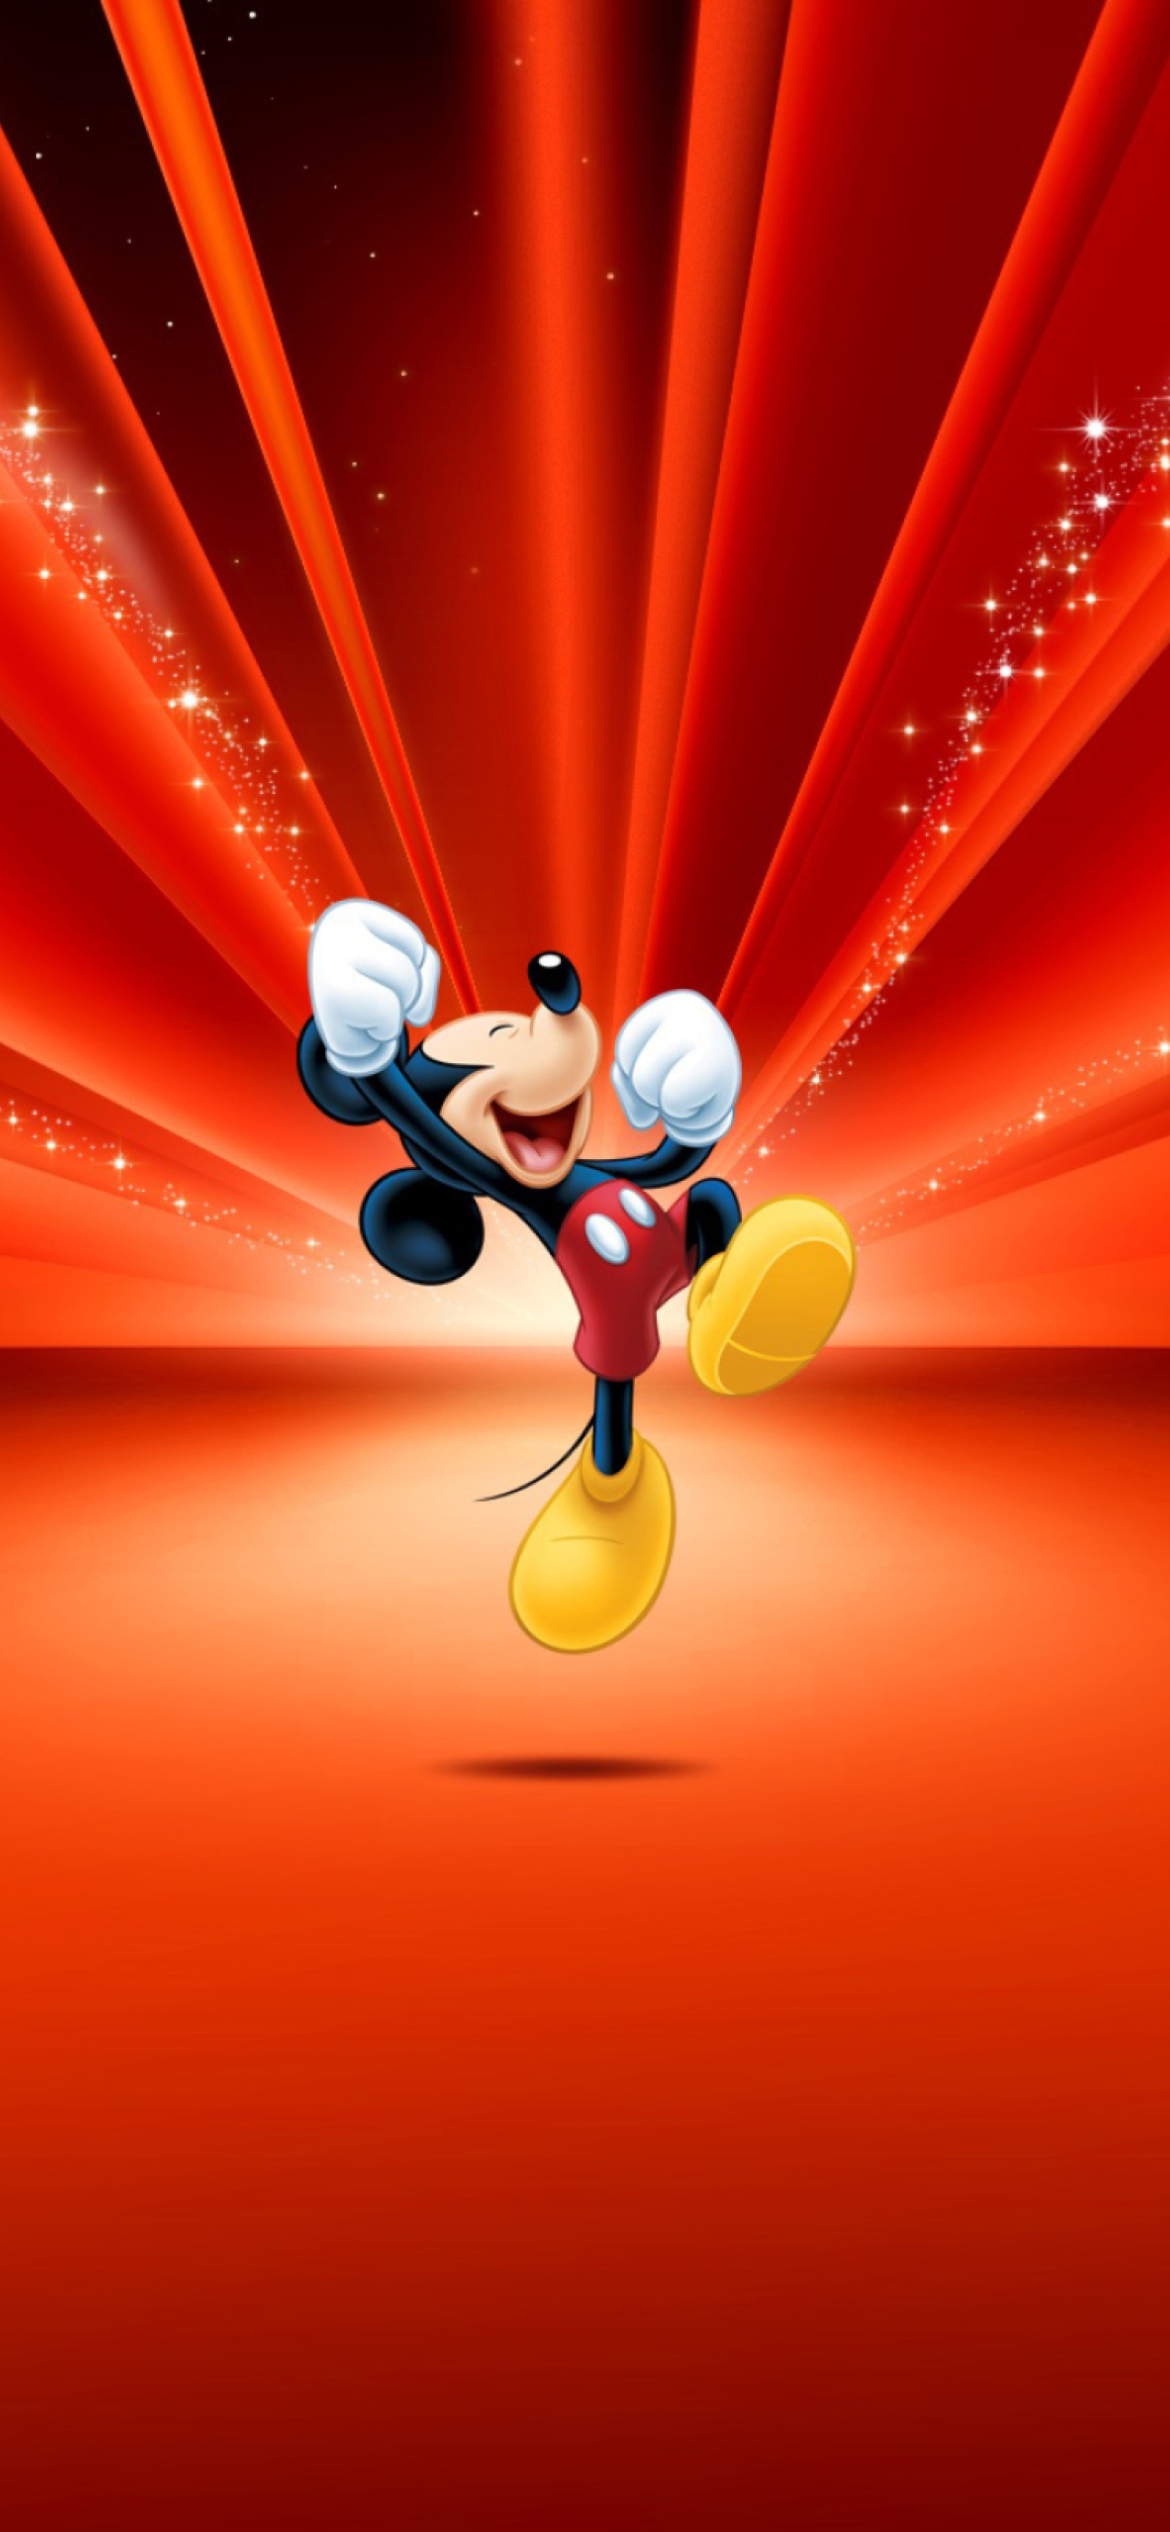 Mickey Mouse Disney Red Wallpaper wallpaper 1170x2532